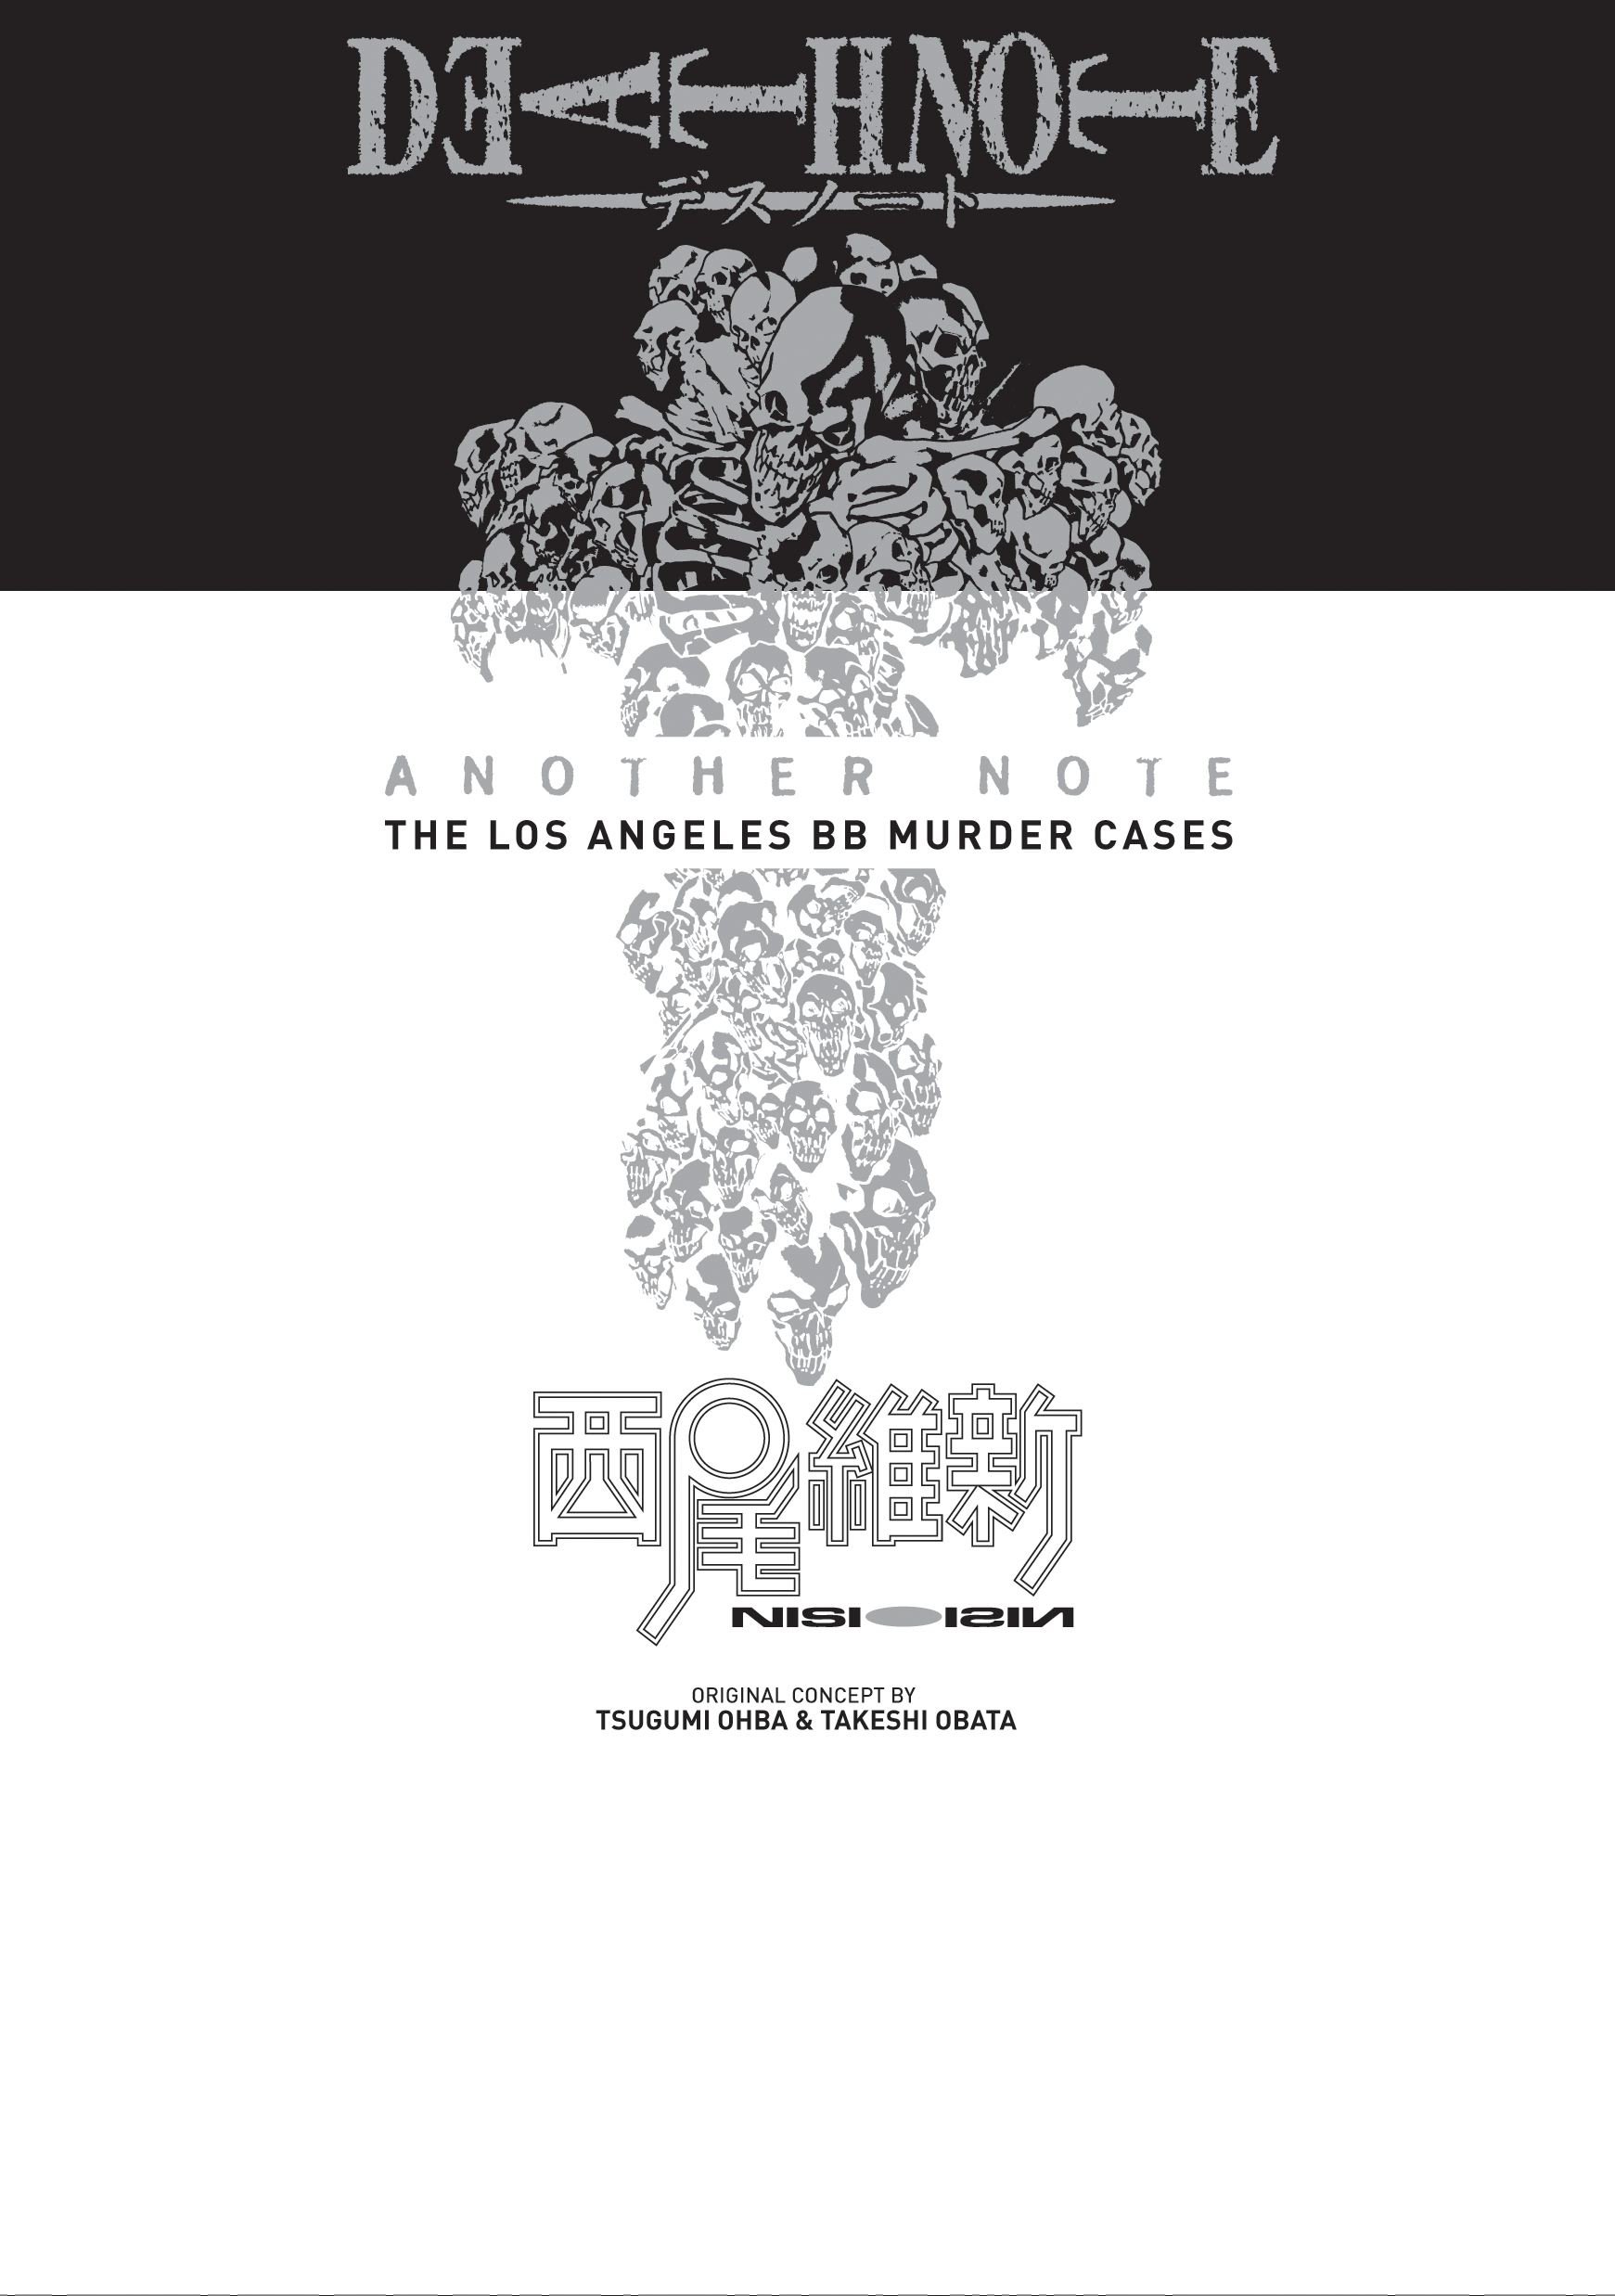 Death Note: Another Note - The Los Angeles BB Murder Cases